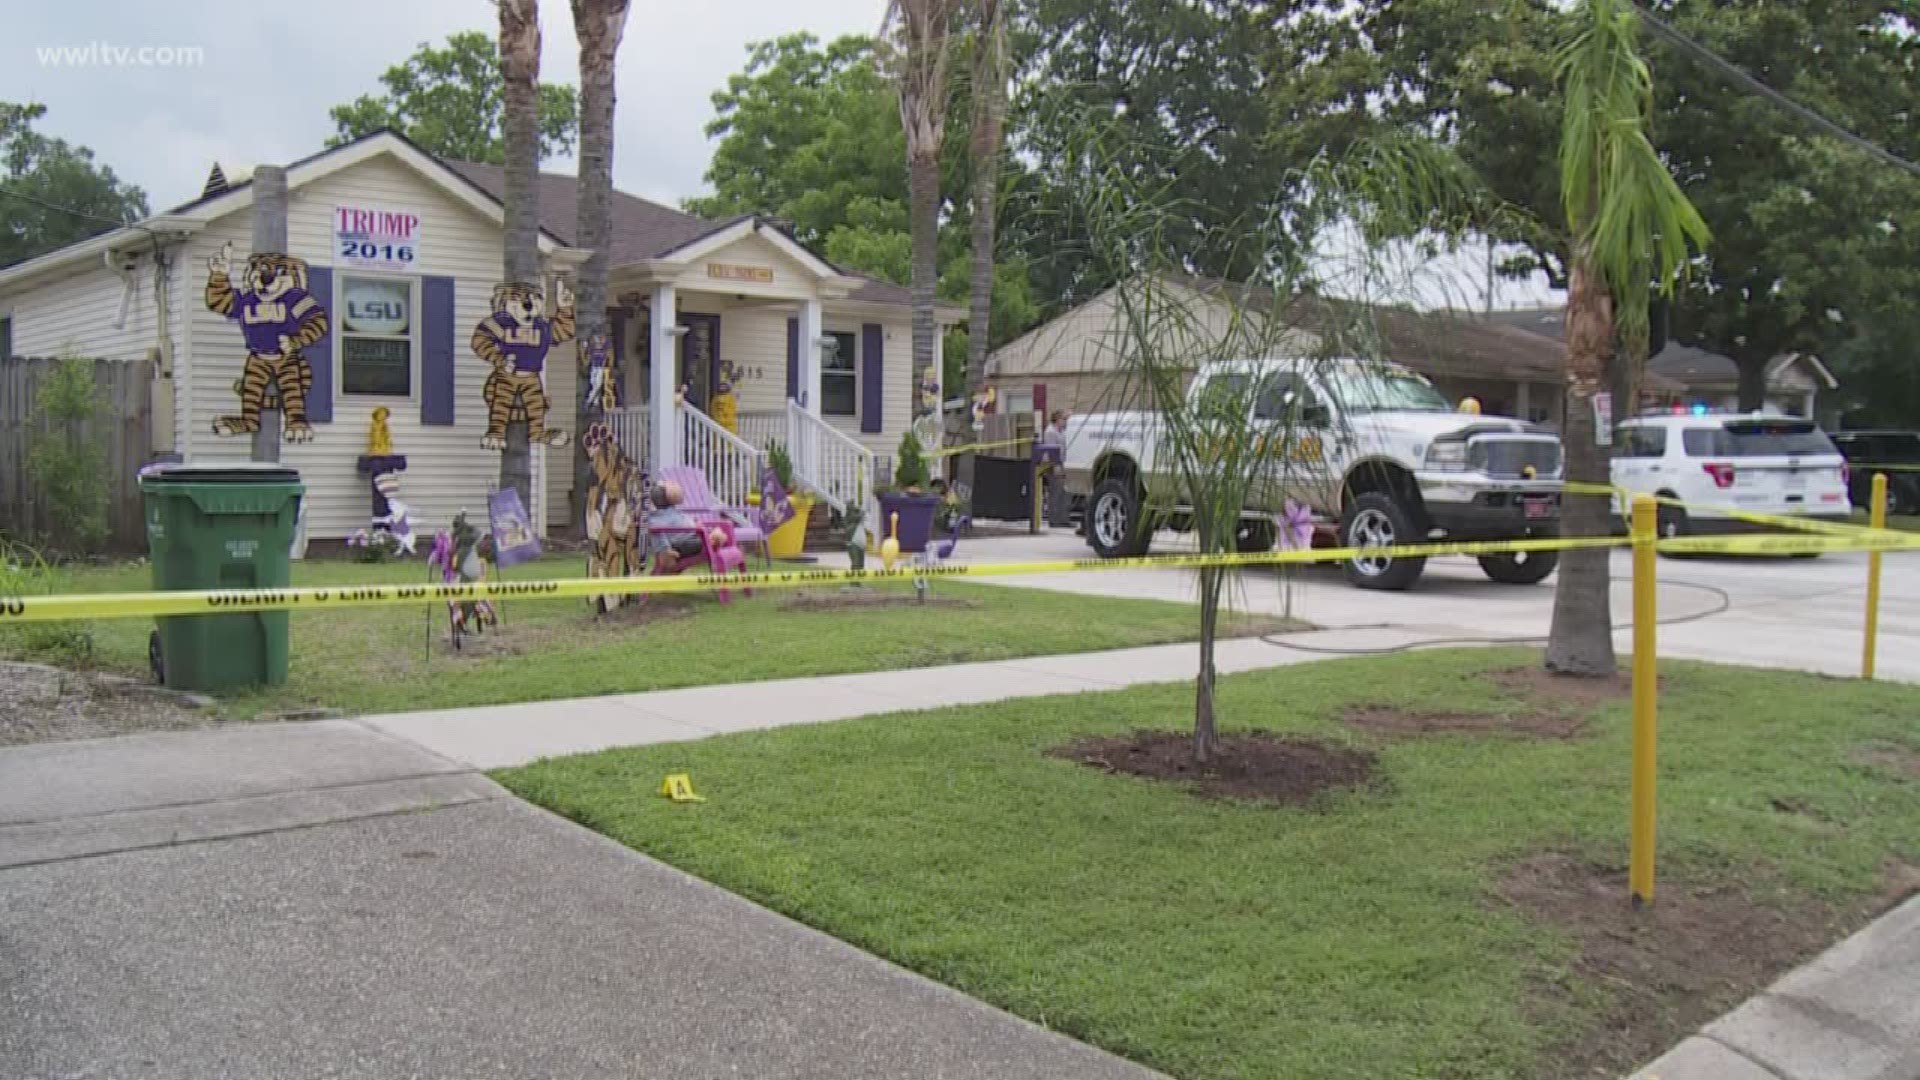 According to the Jefferson Parish Sheriff's Office, the suspect is a neighbor who had an ongoing feud with him. 